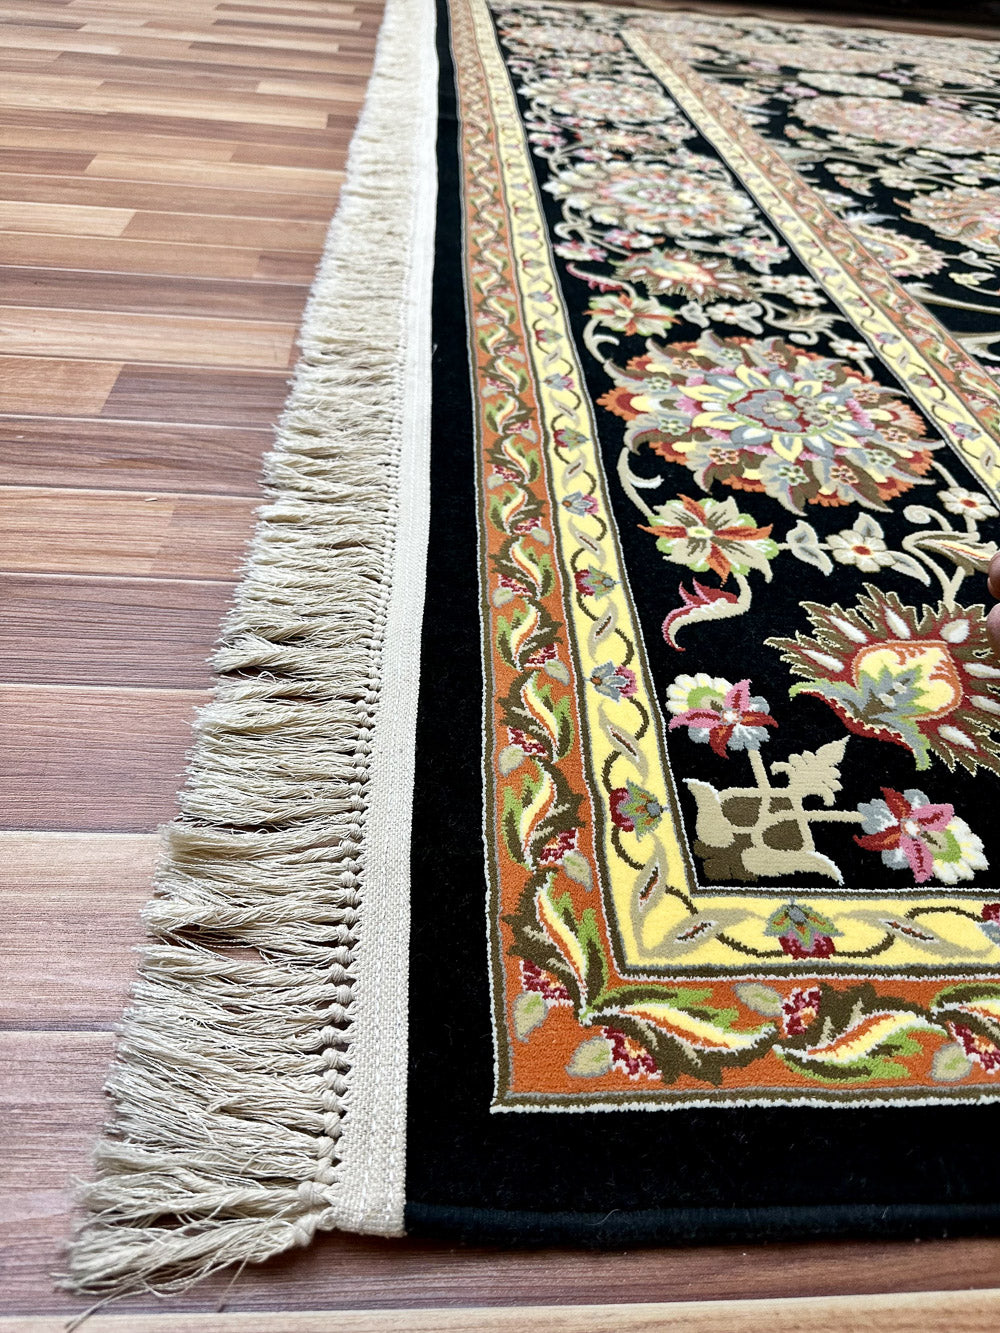 10 ft x 13 ft - Area Rug - Persian 1200 Reeds - Farsh Estark 1 - Black and Beige with Multi Colors